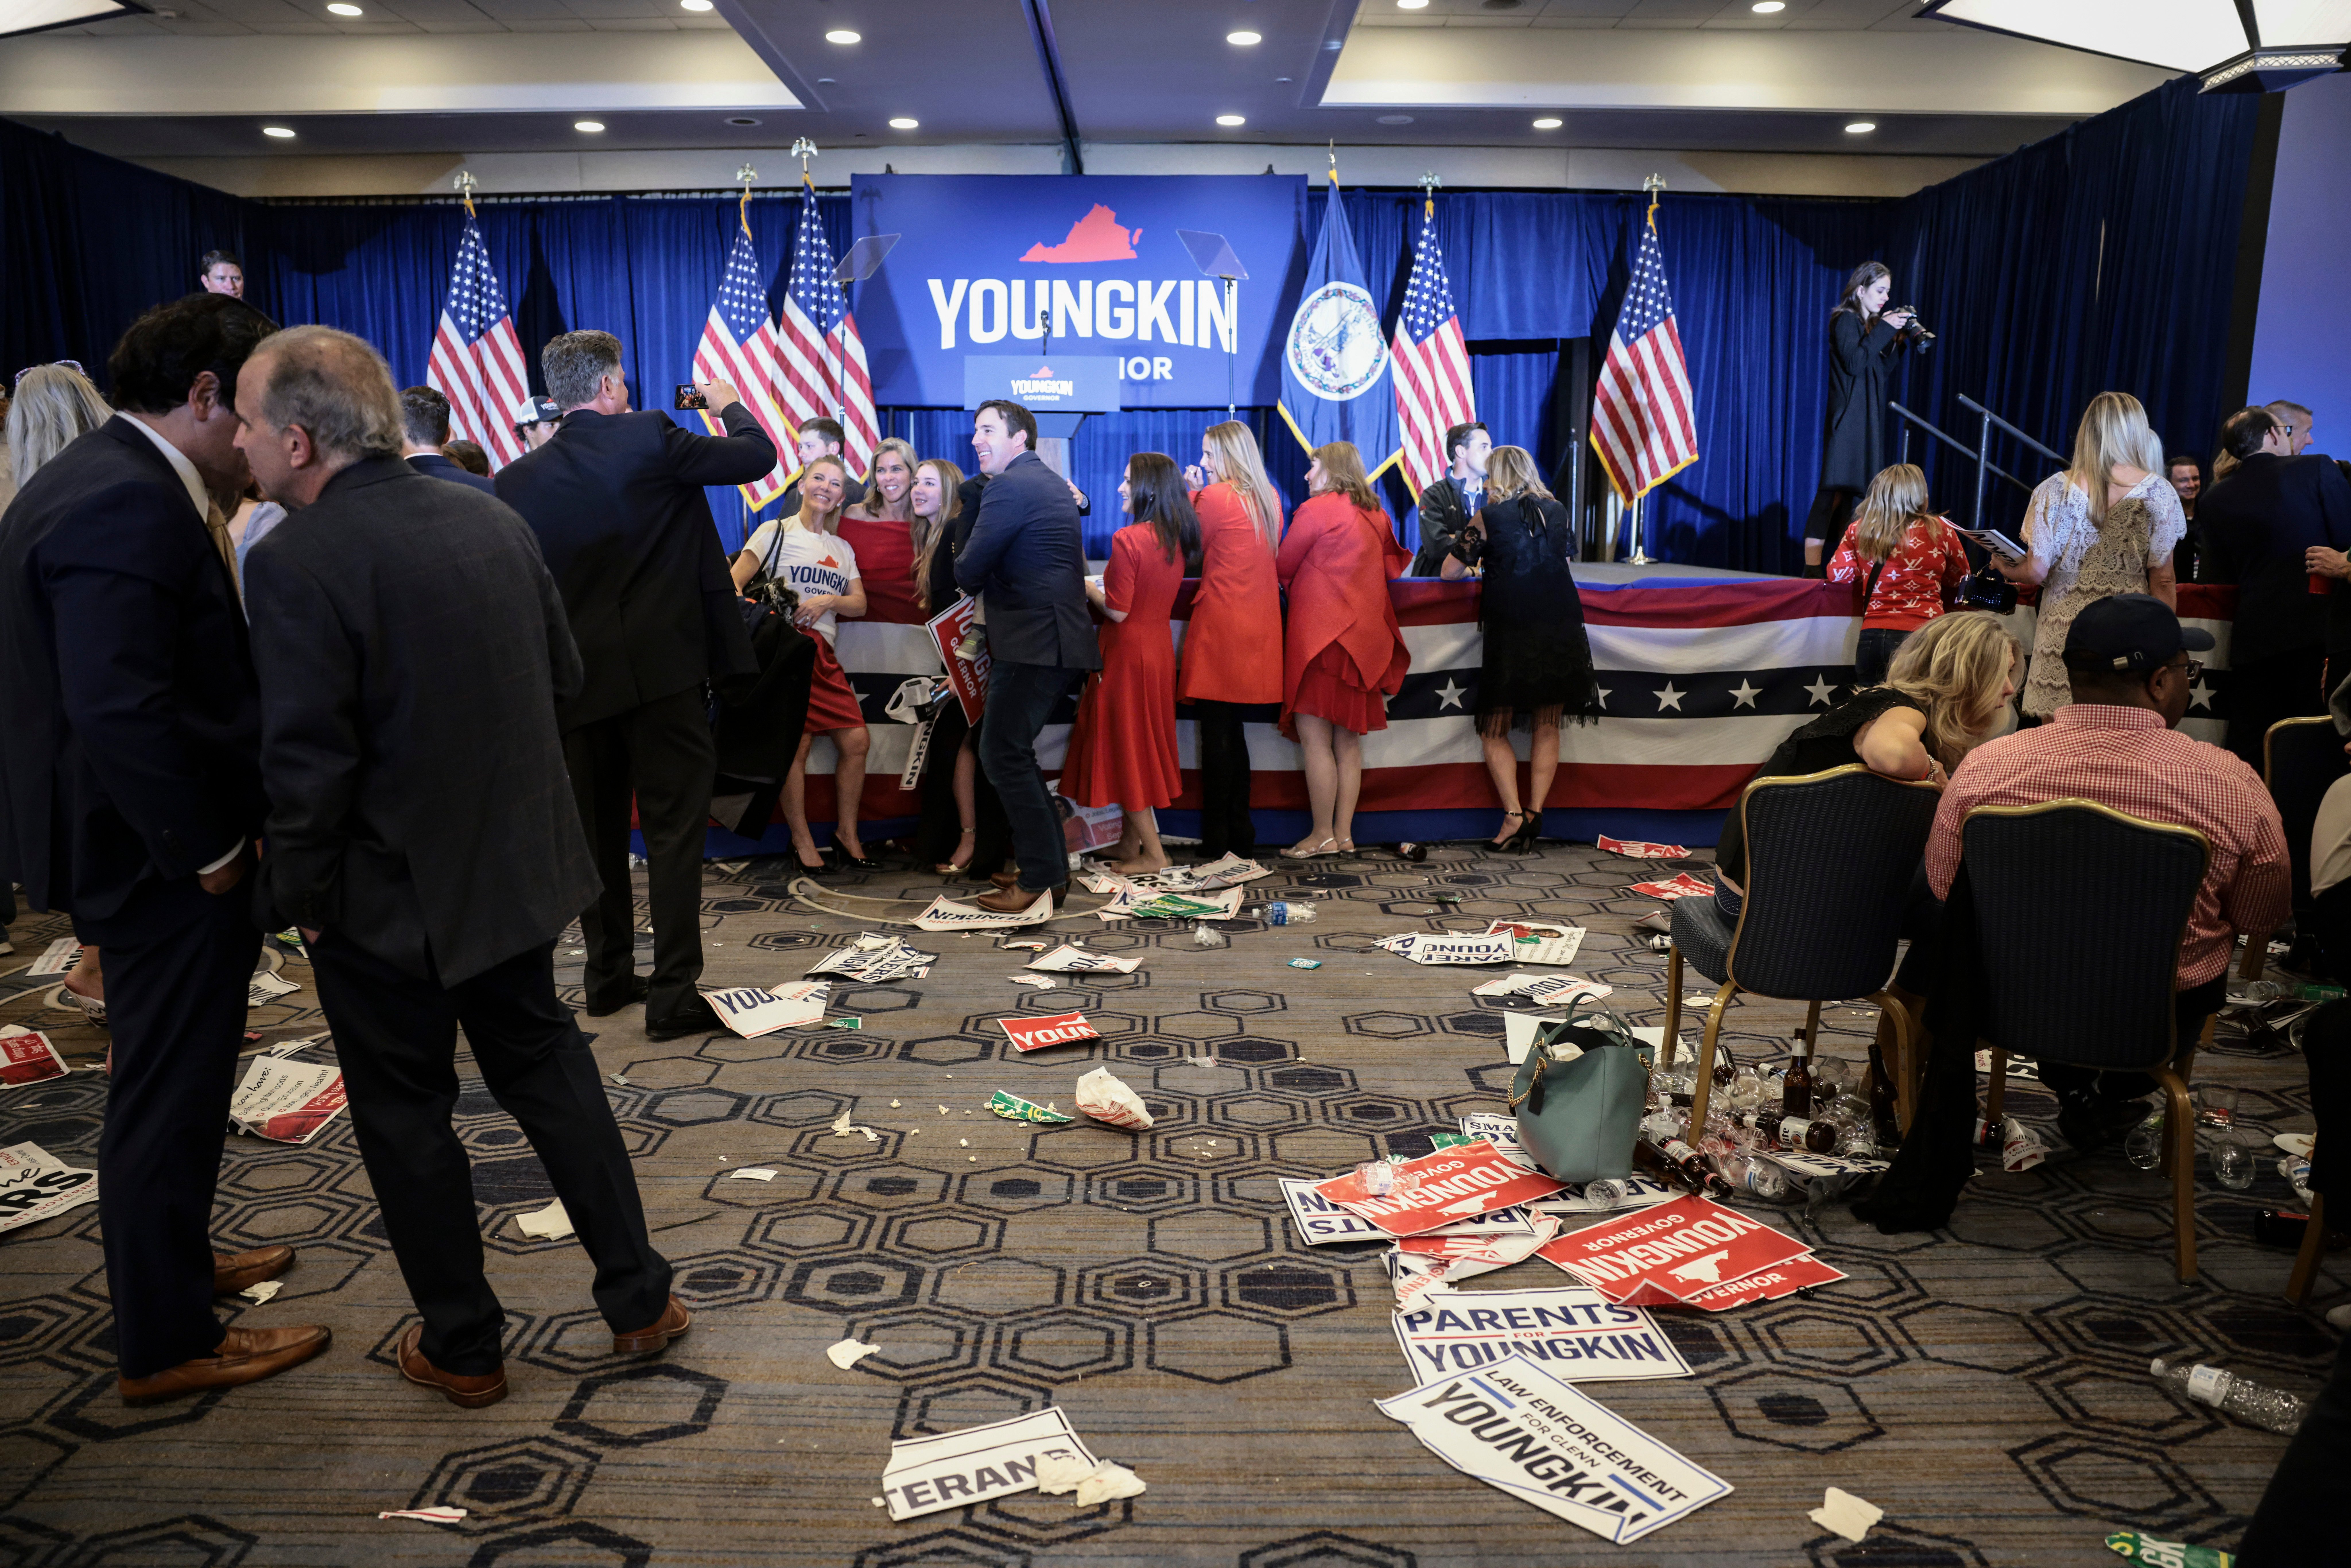 Attendees wait to take a photo with Virginia Republican gubernatorial candidate Glenn Youngkin at Youngkin's election night rally at the Westfields Marriott Washington Dulles on November 02, 2021 in Chantilly, Virginia. (Photo by Anna Moneymaker/Getty Images)